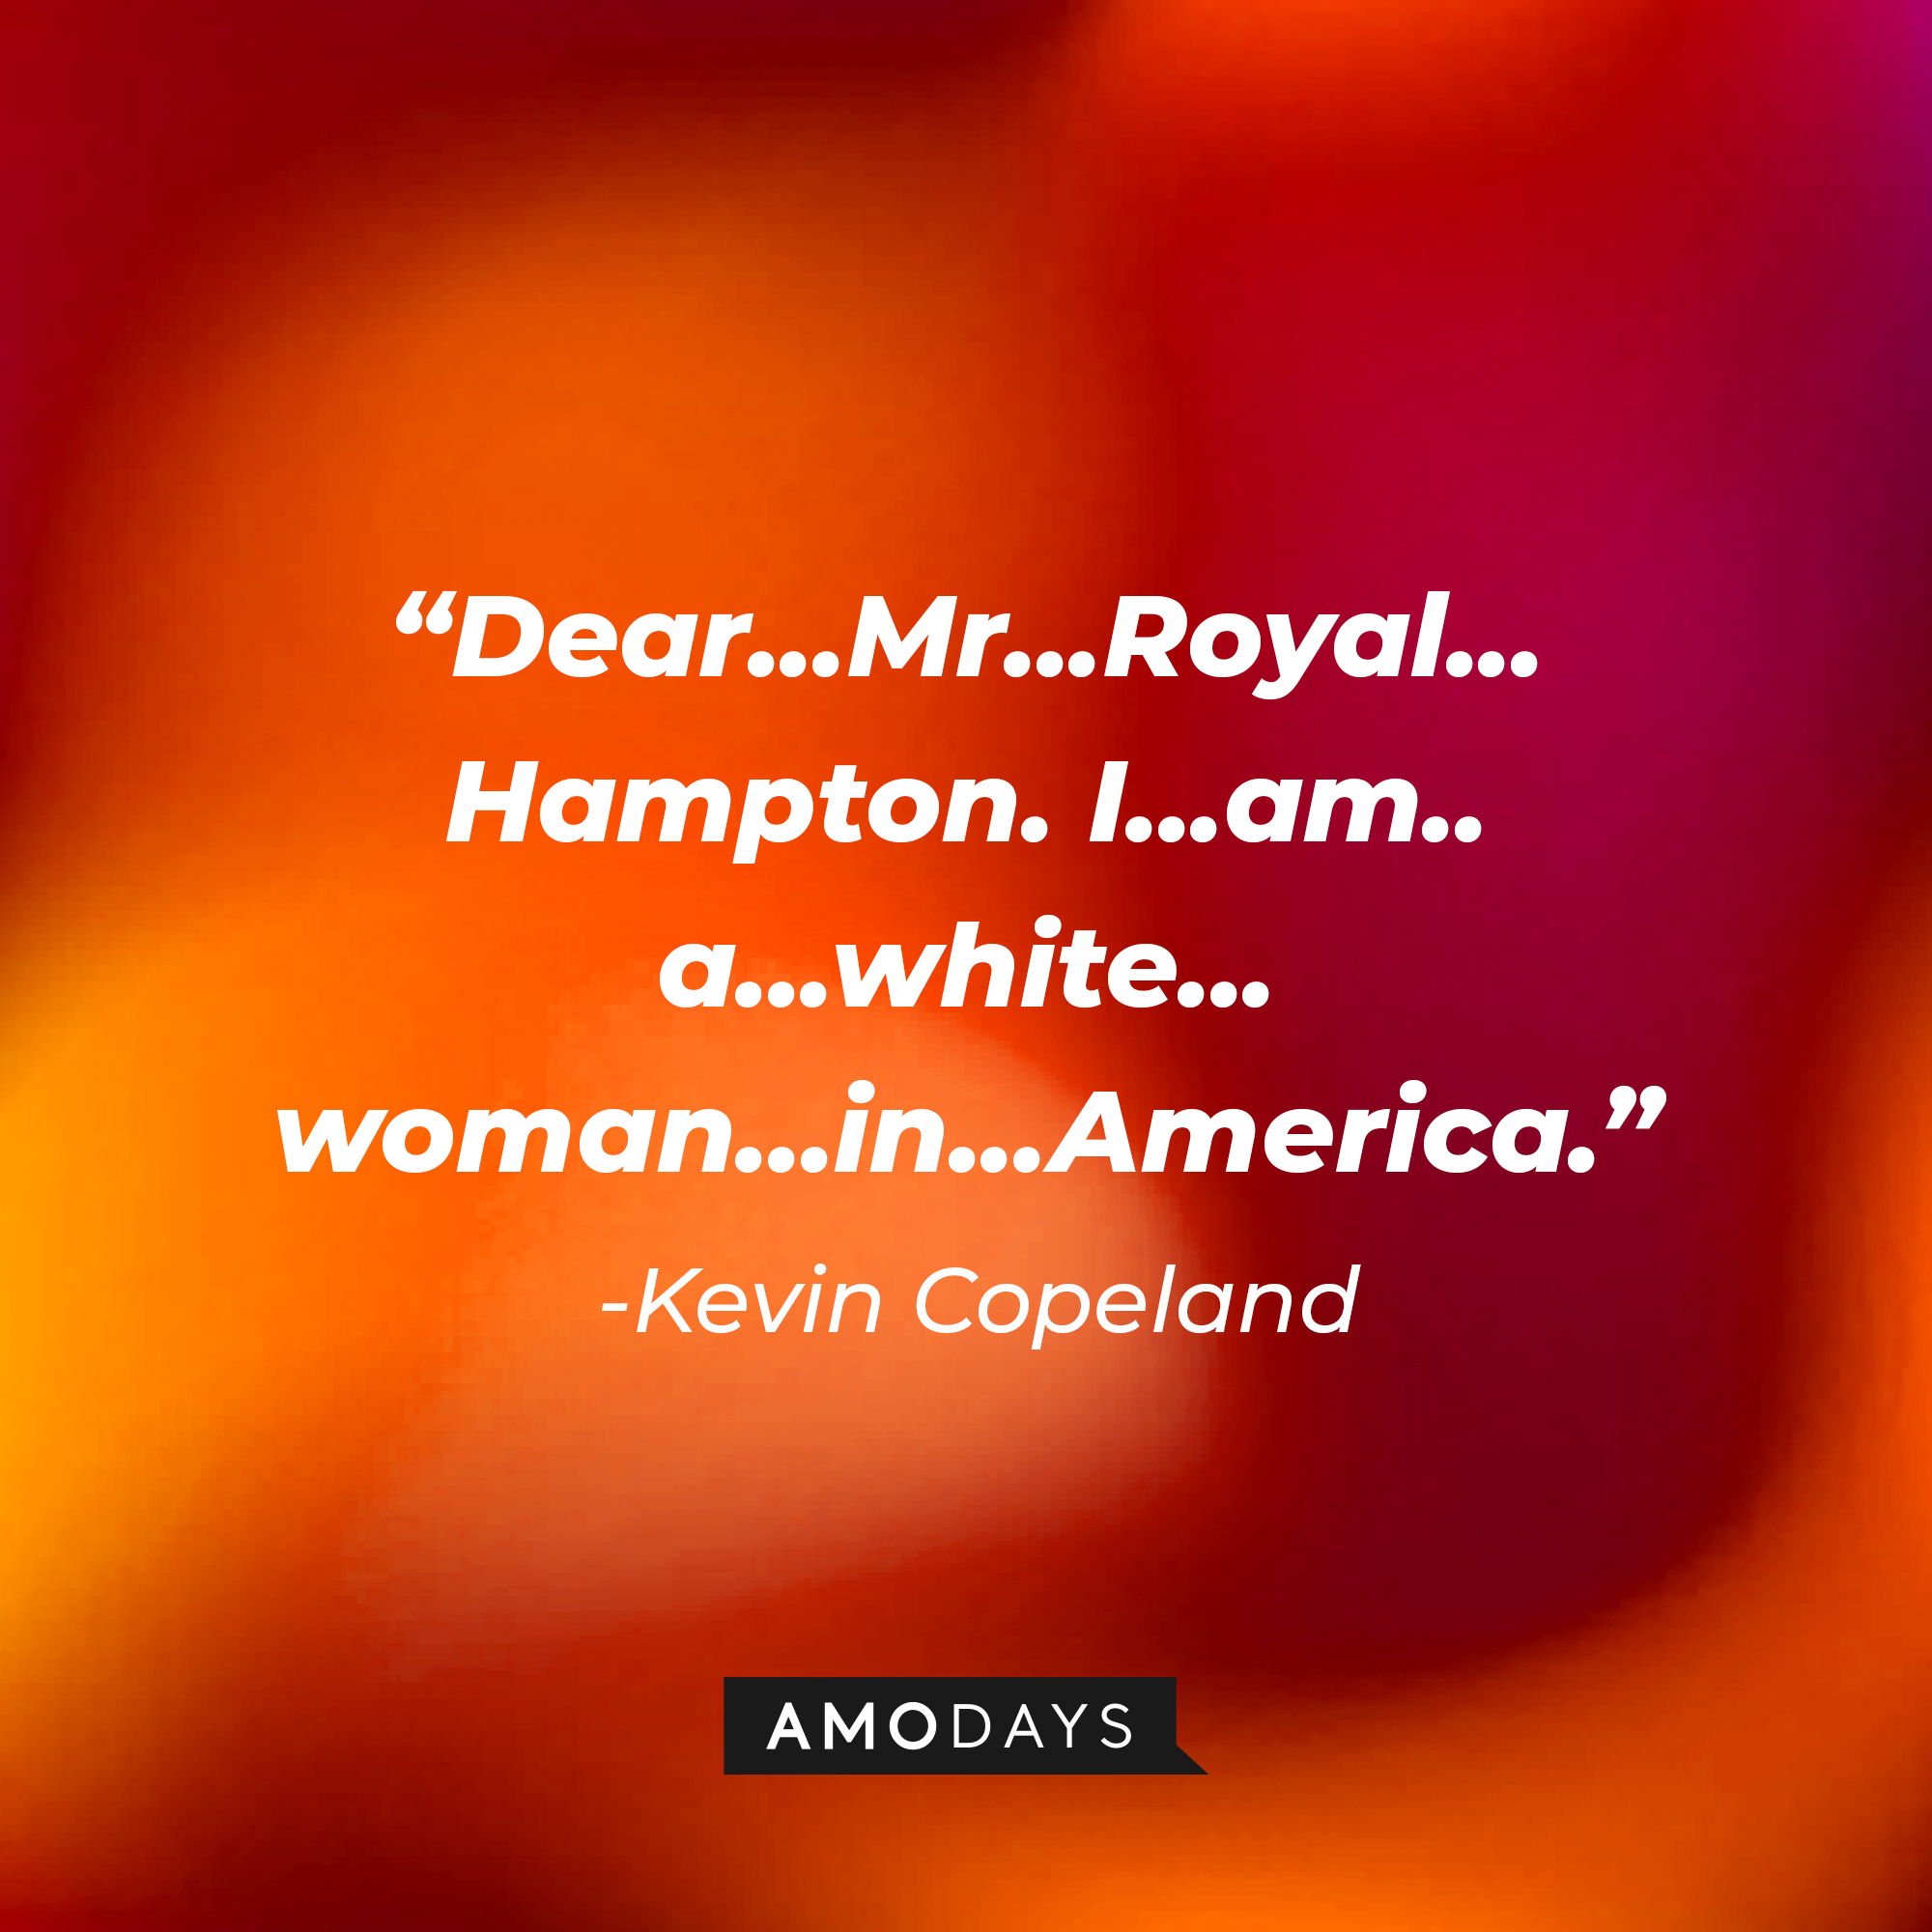 Kevin Copeland’s quote: “Dear...Mr...Royal... Hampton. I...am.. a...white... woman...in...America.” | Source: AmoDays